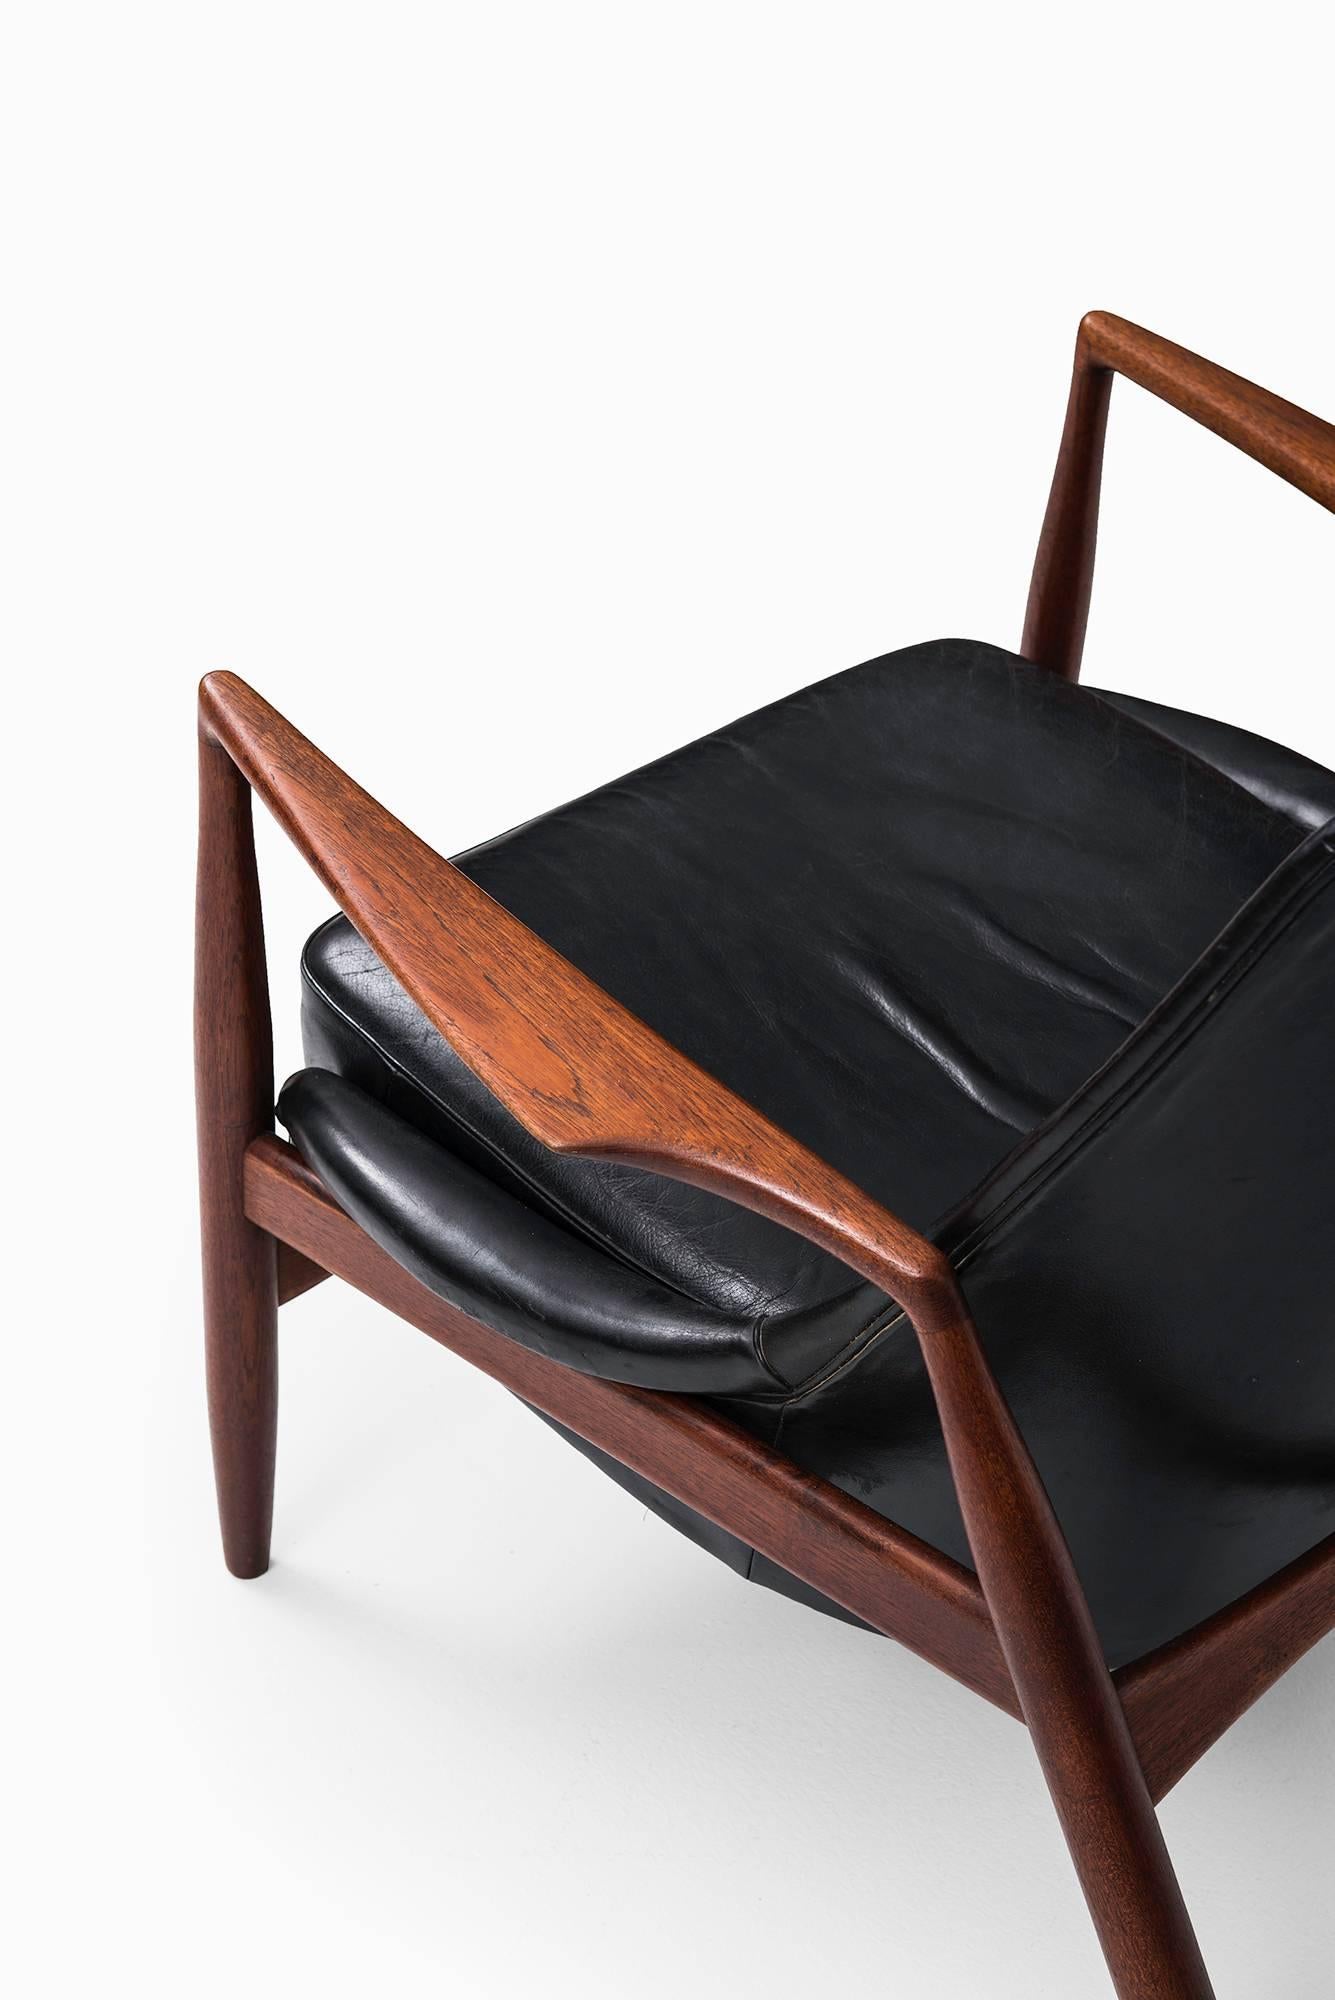 Leather Ib Kofod-Larsen Seal Easy Chairs by OPE in Sweden